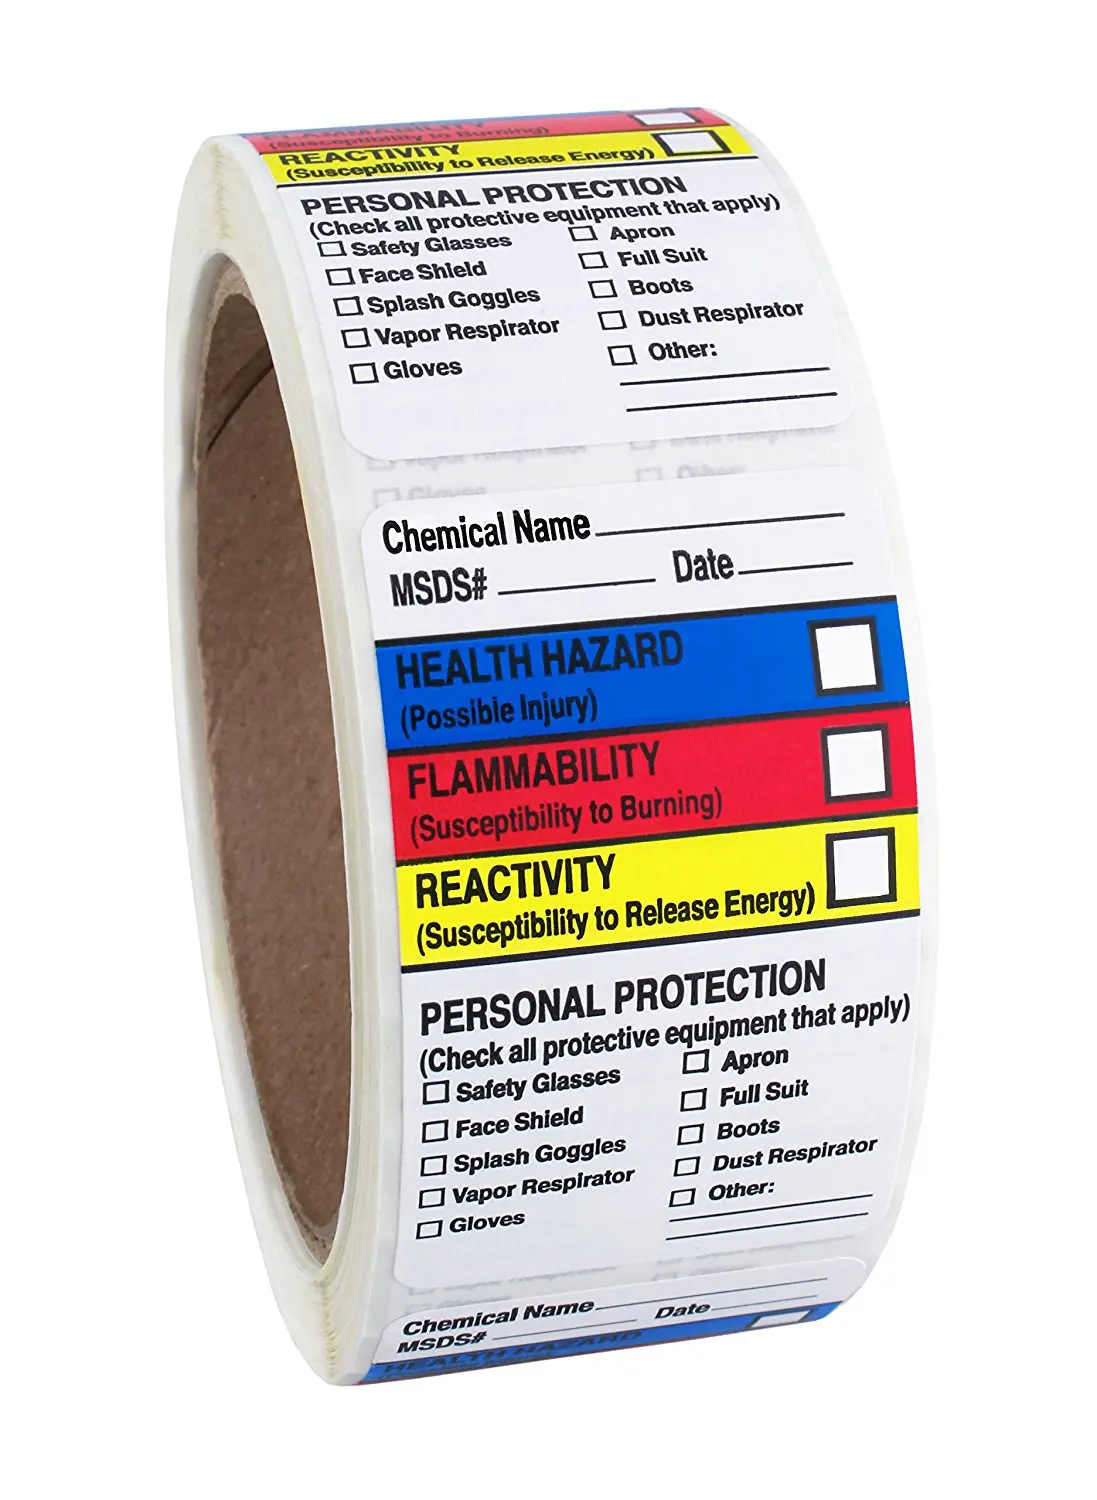 MSDS Chemical Name Roll Products 163-0015 Litho Removable Adhesive HMIG Label with 4 Color Imprint White Roll of 250 2-1//2 Length x 1-1//2 Width with blank For Identifying and Marking